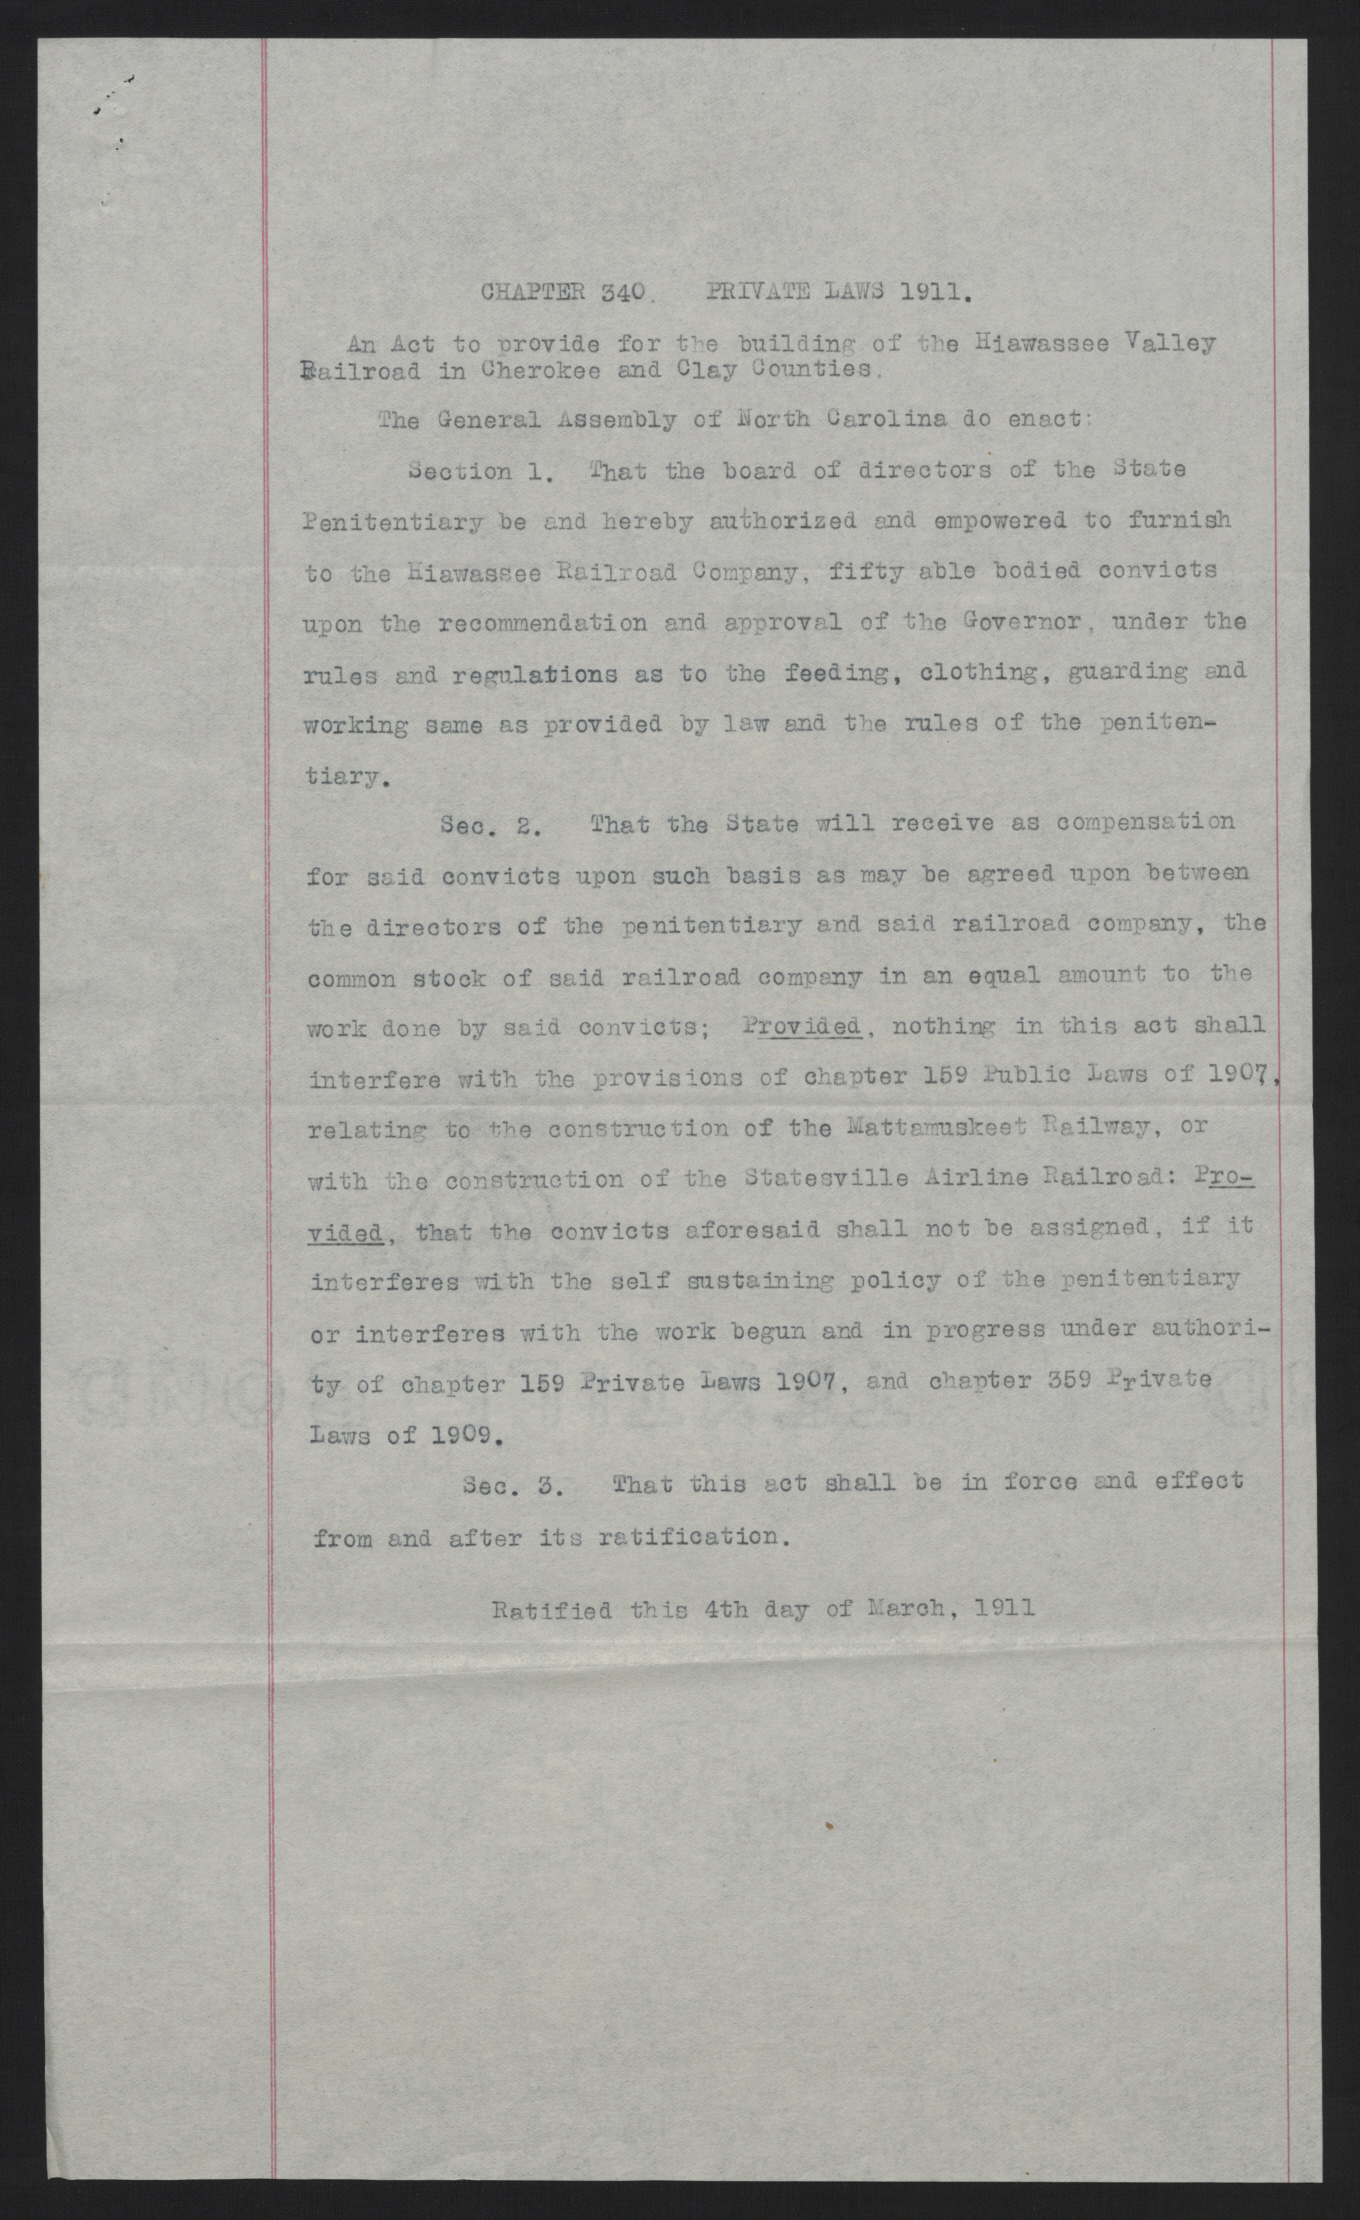 An Act to Provide for the Building of the Hiawassee Valley Railroad in Cherokee and Clay Counties, March 4, 1911